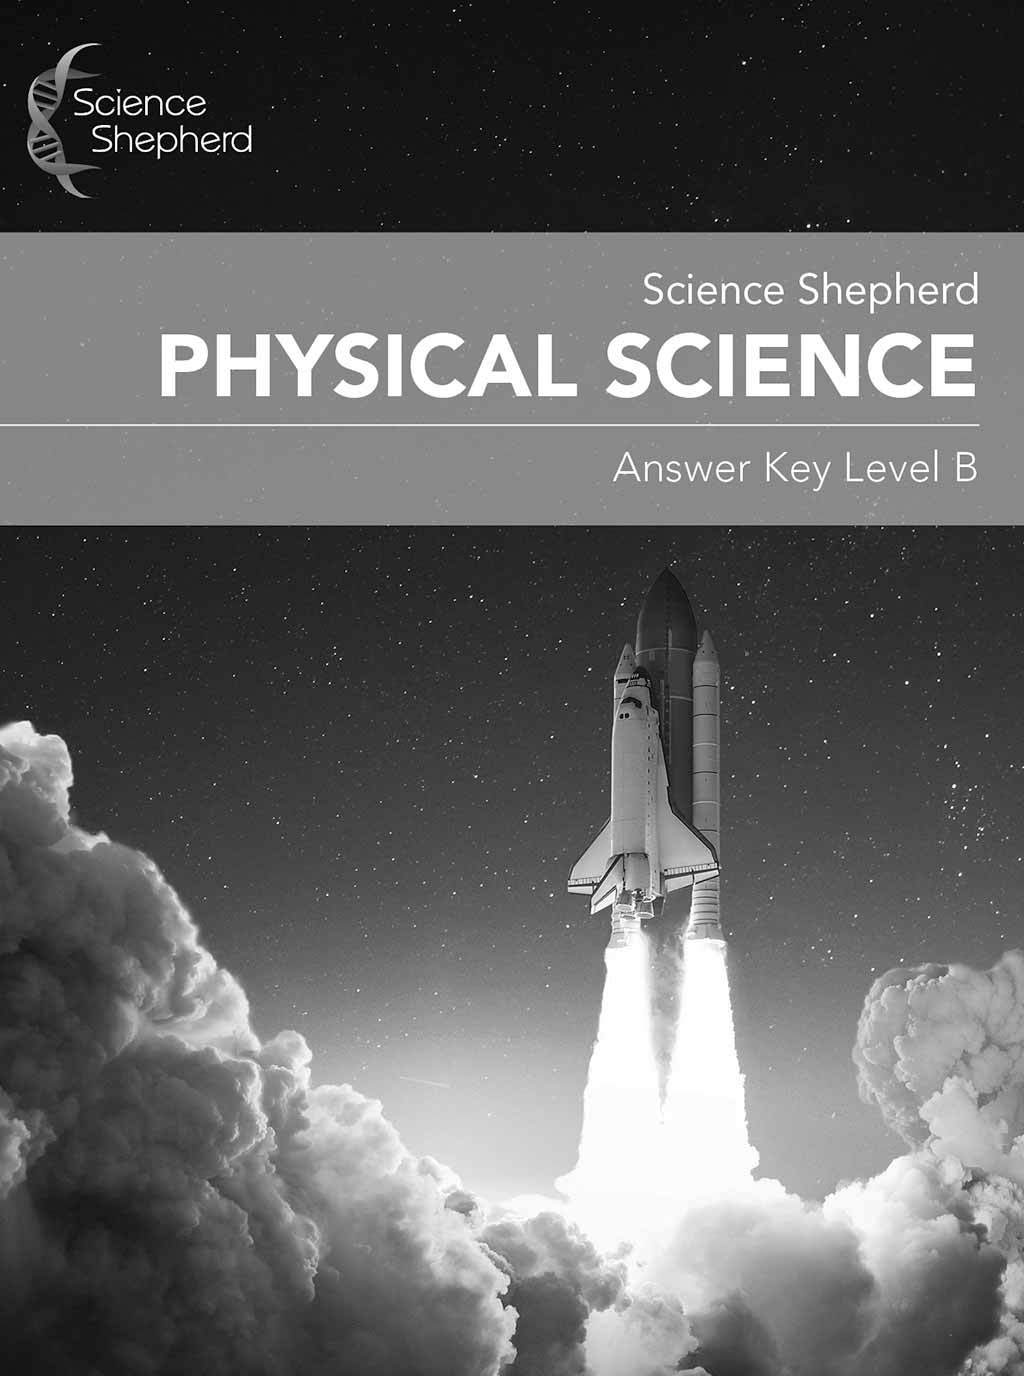 Physical Science home school curriculum answer key Level B cover of a space shuttle in grayscale